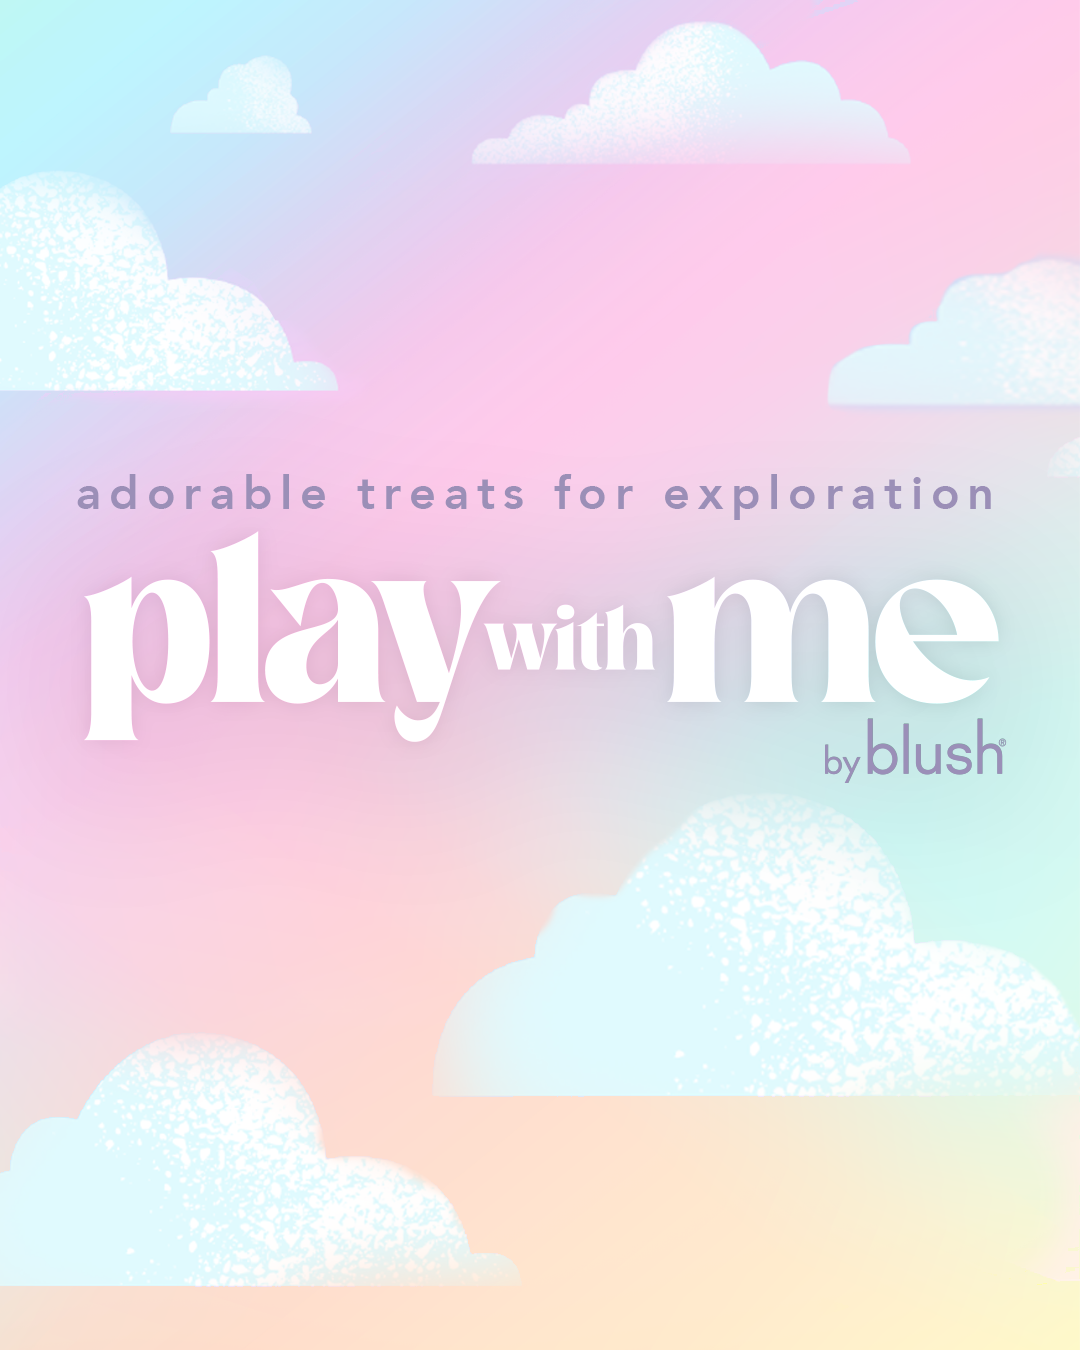 blush-PlayWithMe-BlushVibe-Banner-Mobile-noproduct-300dpi-1080x1350.png